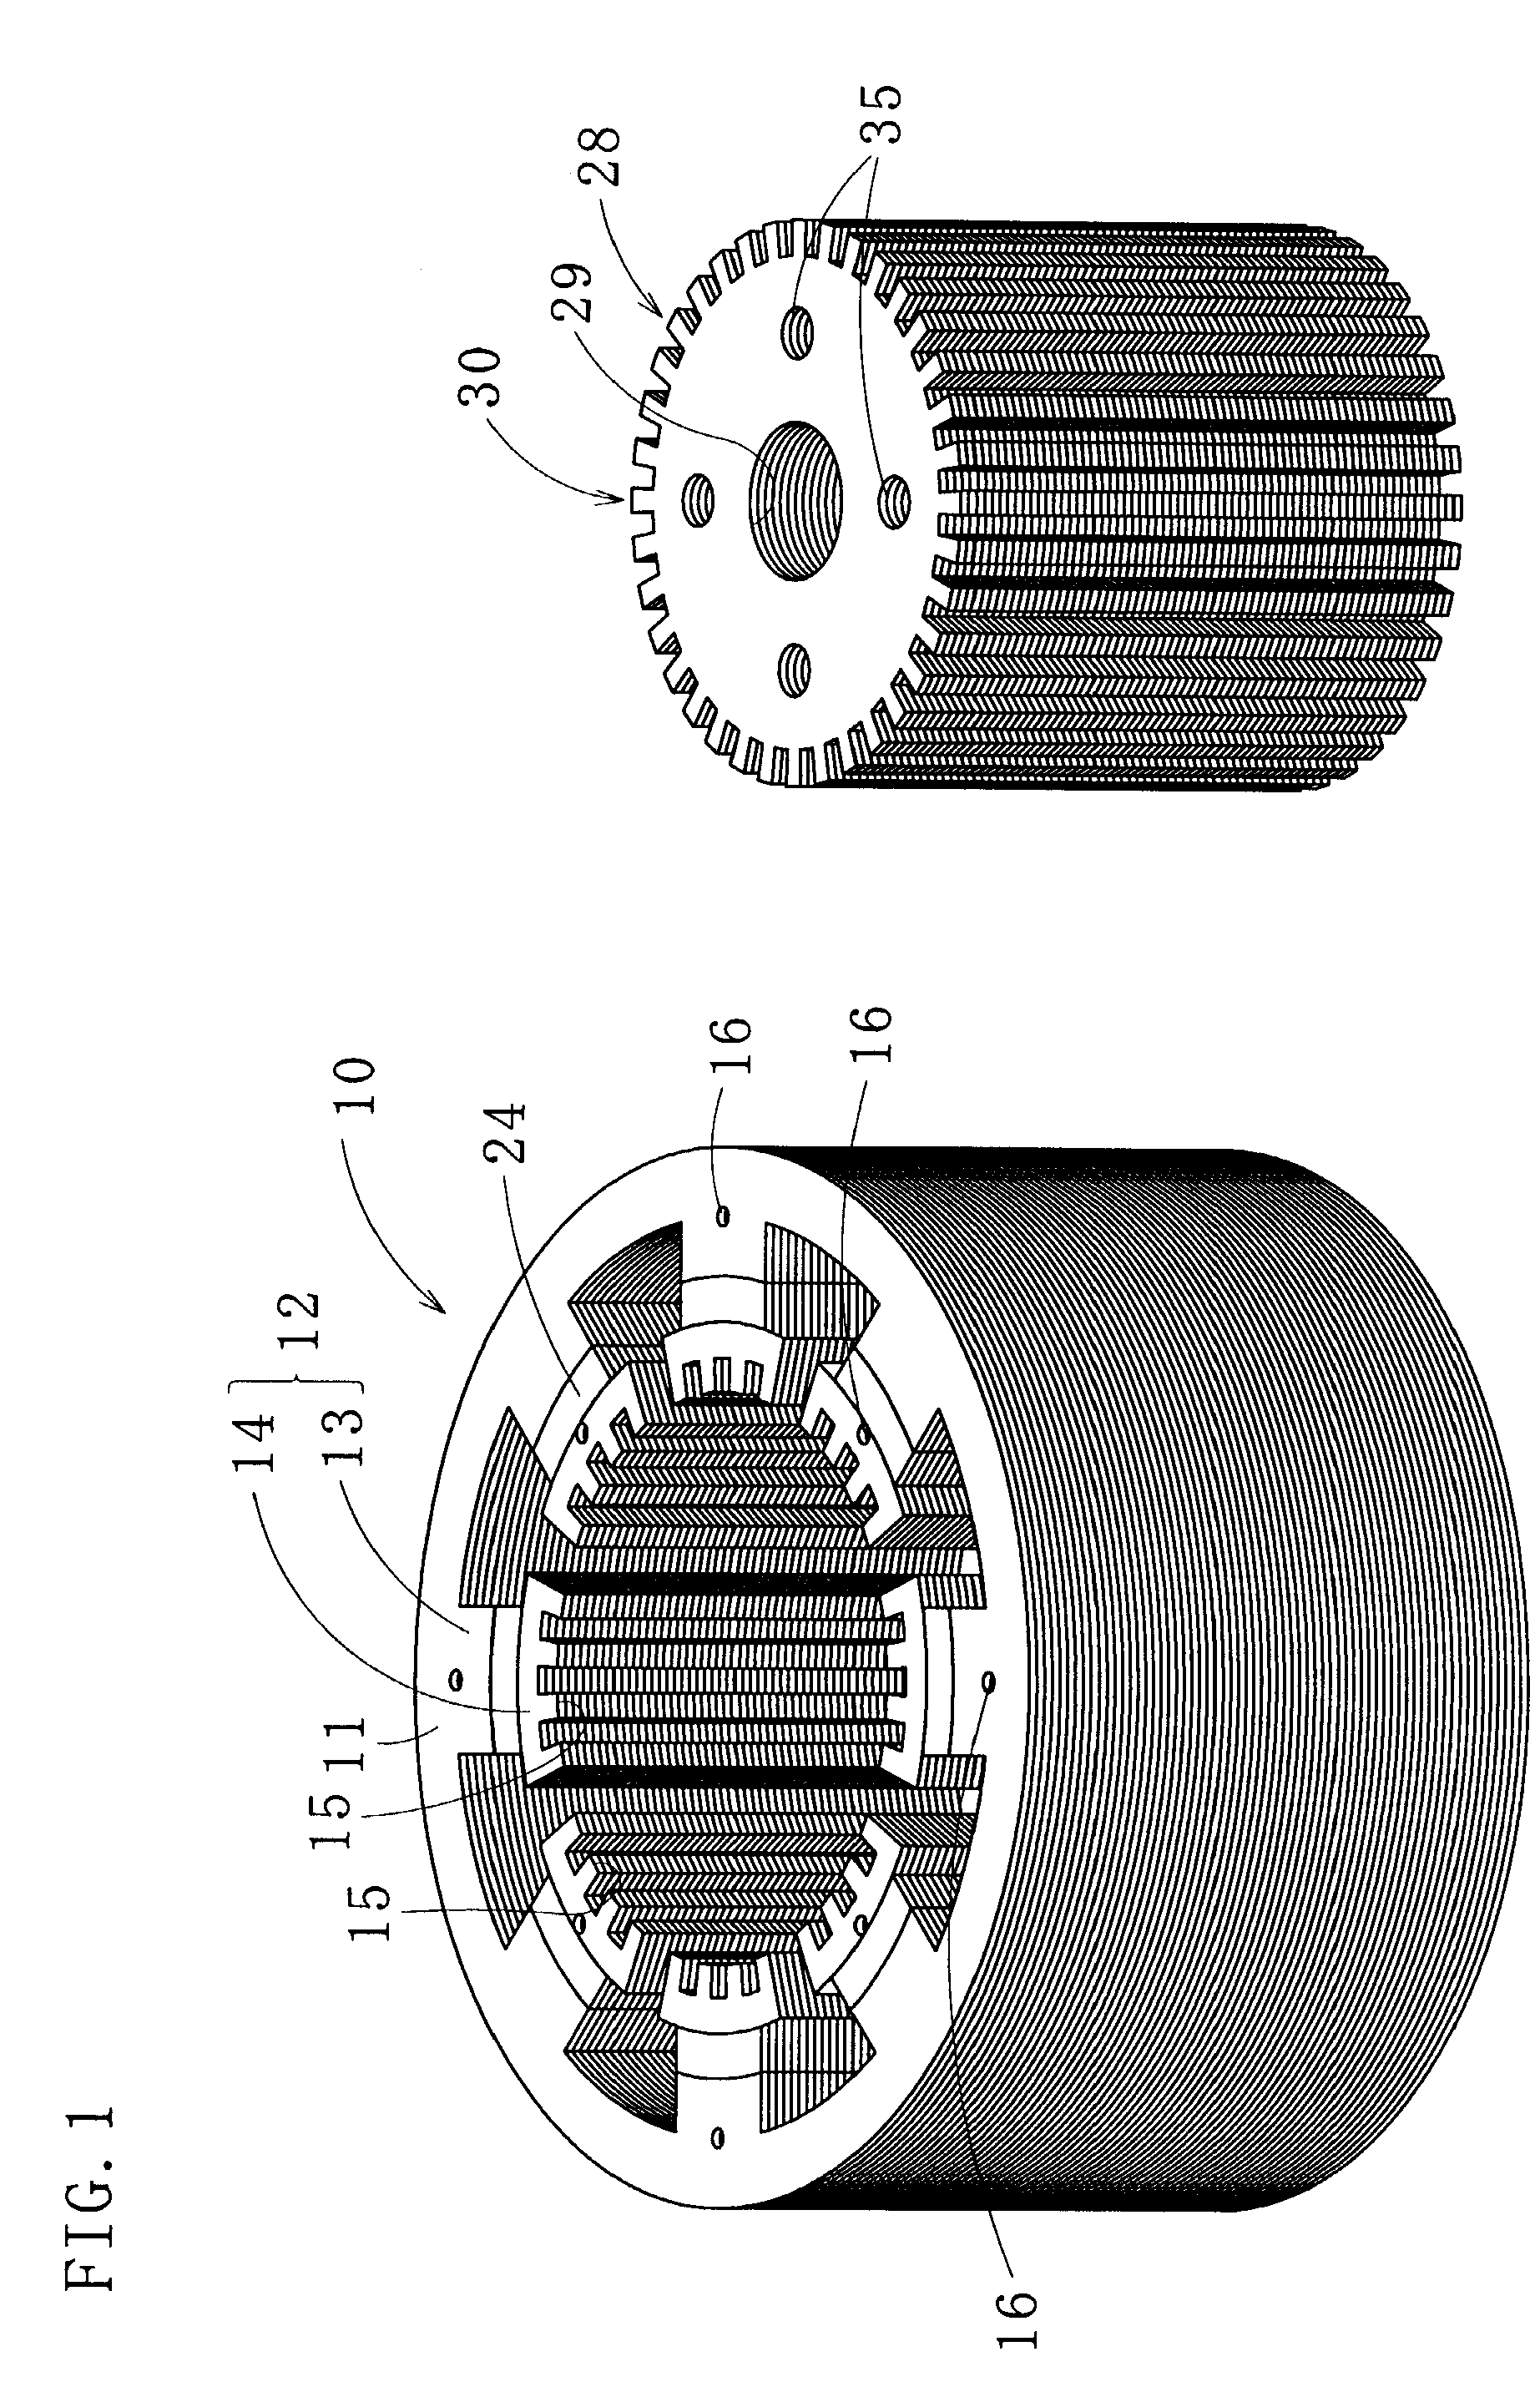 Stator core and method of manufacturing same